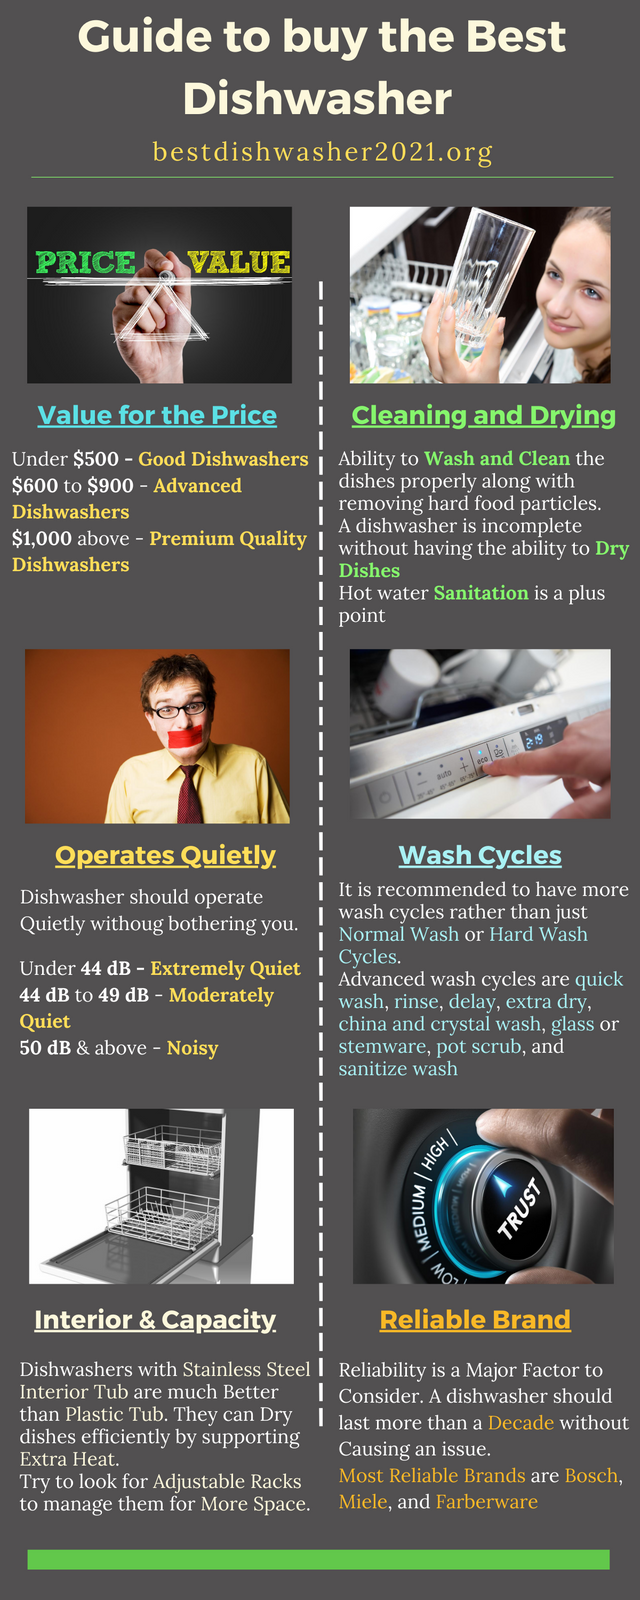 Guide to buy the Best Dishwasher.png